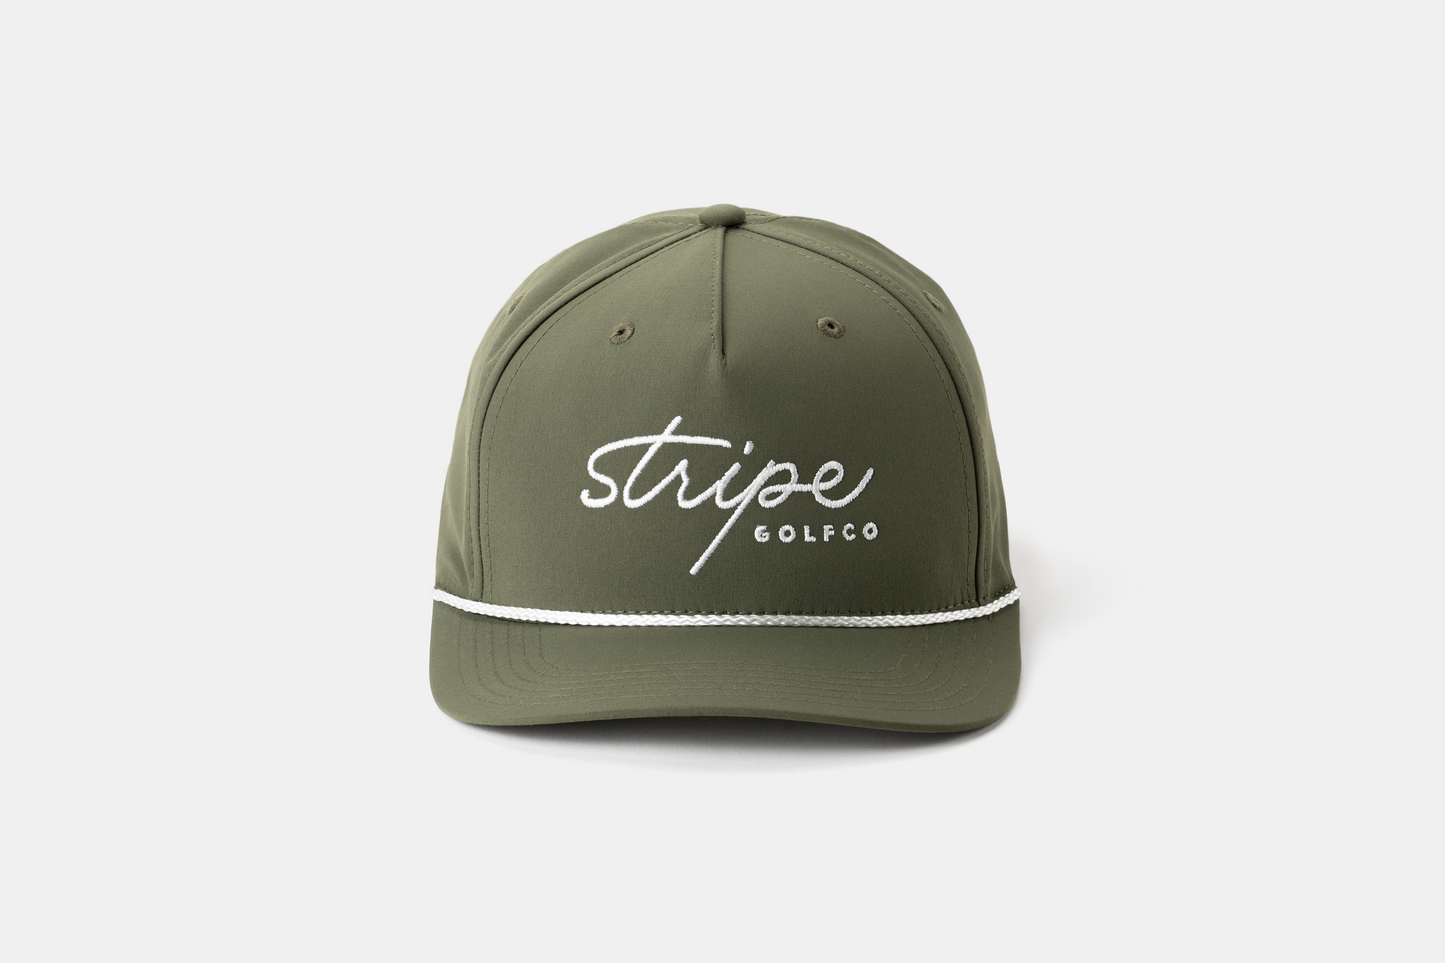 Stripe Golf Co. Rope - Olive Green and White